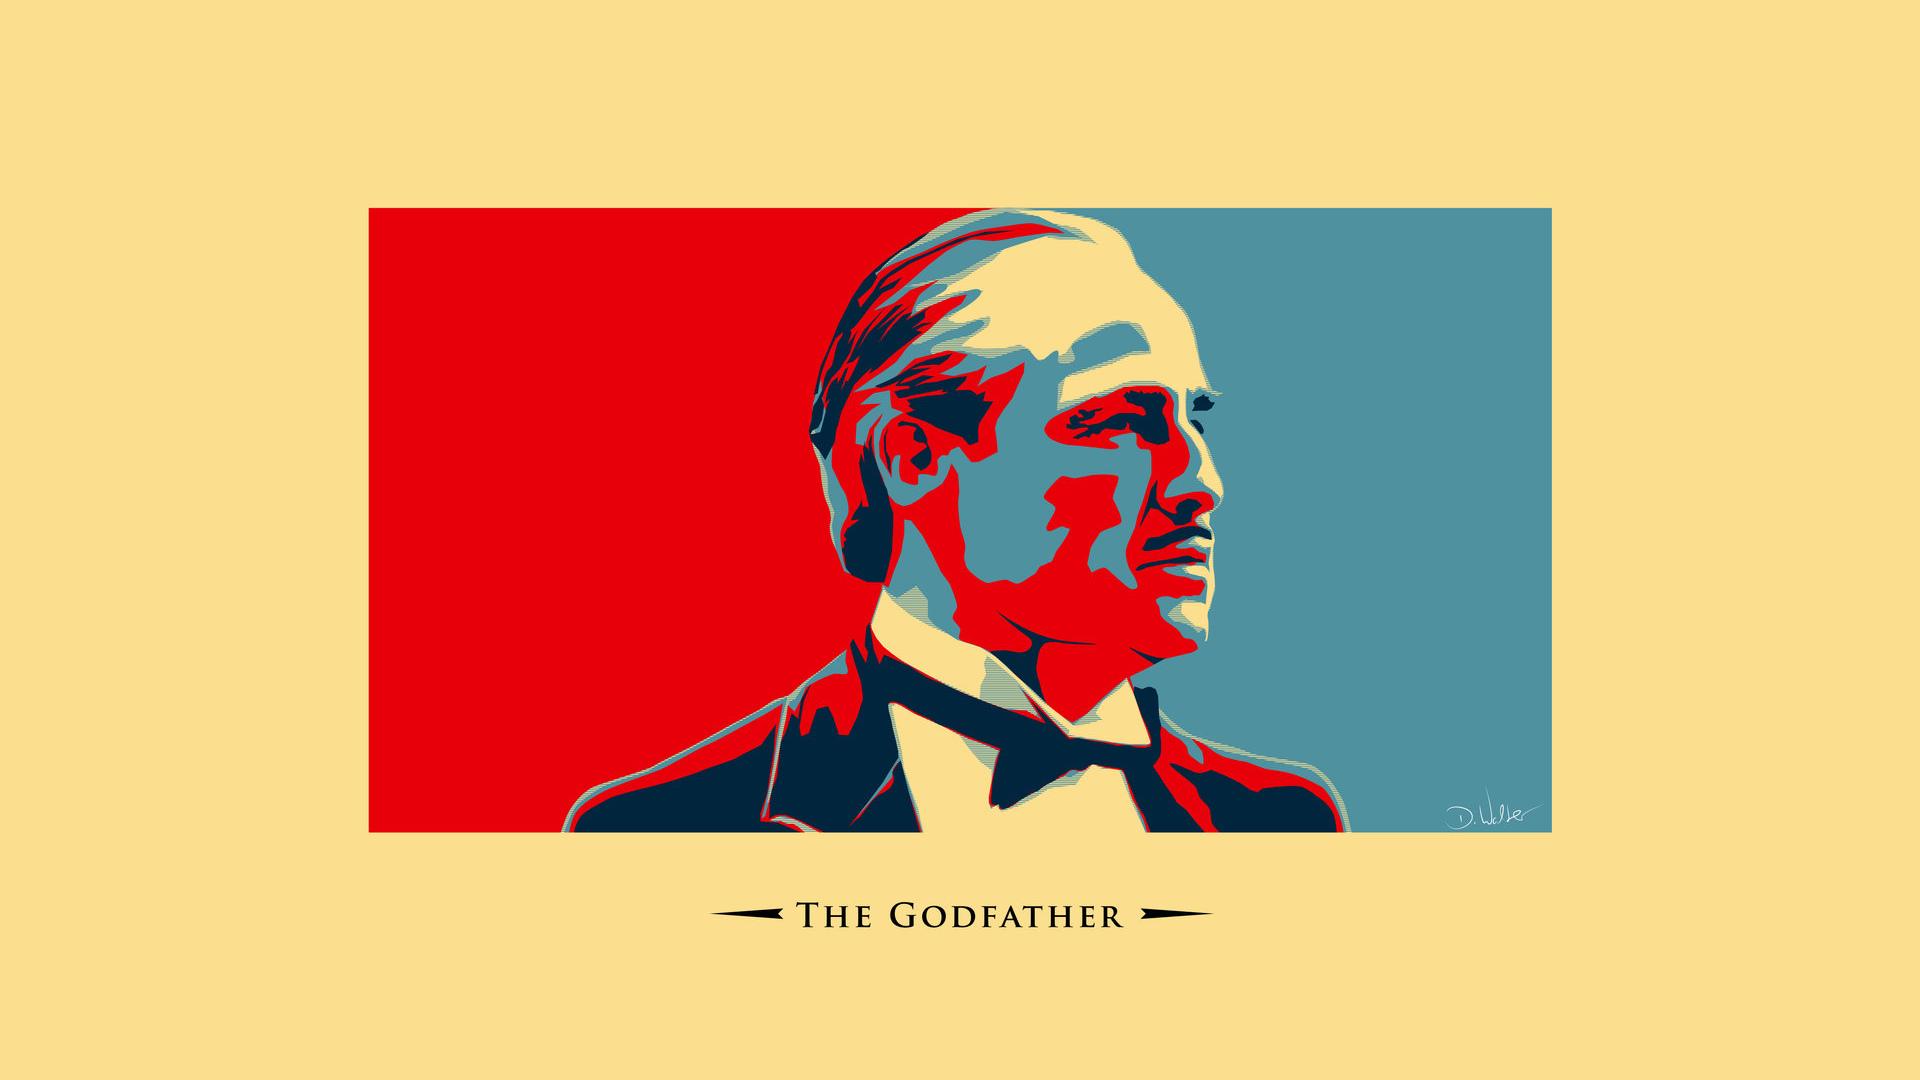 Movie The Godfather HD Wallpaper | Background Image